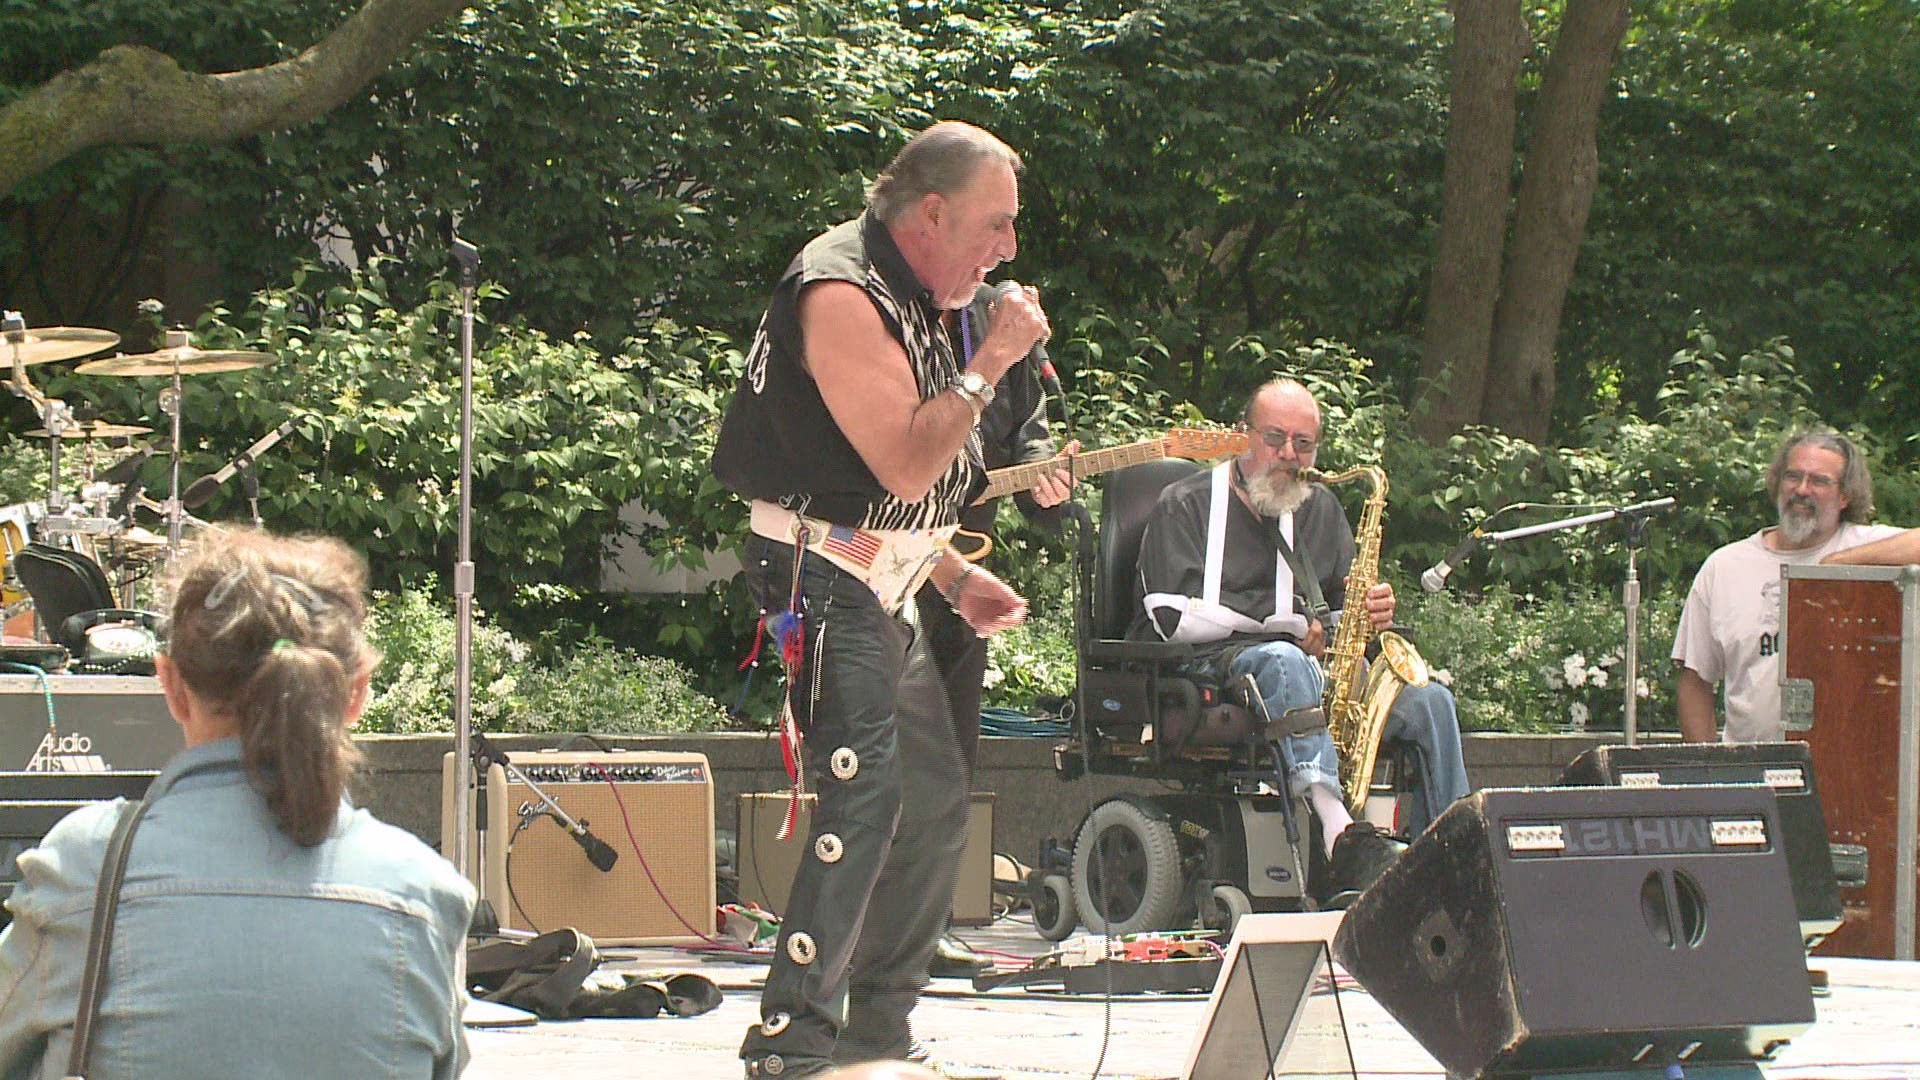 Big Wheelie performs with the Hubcaps in 2017 in M&T Plaza